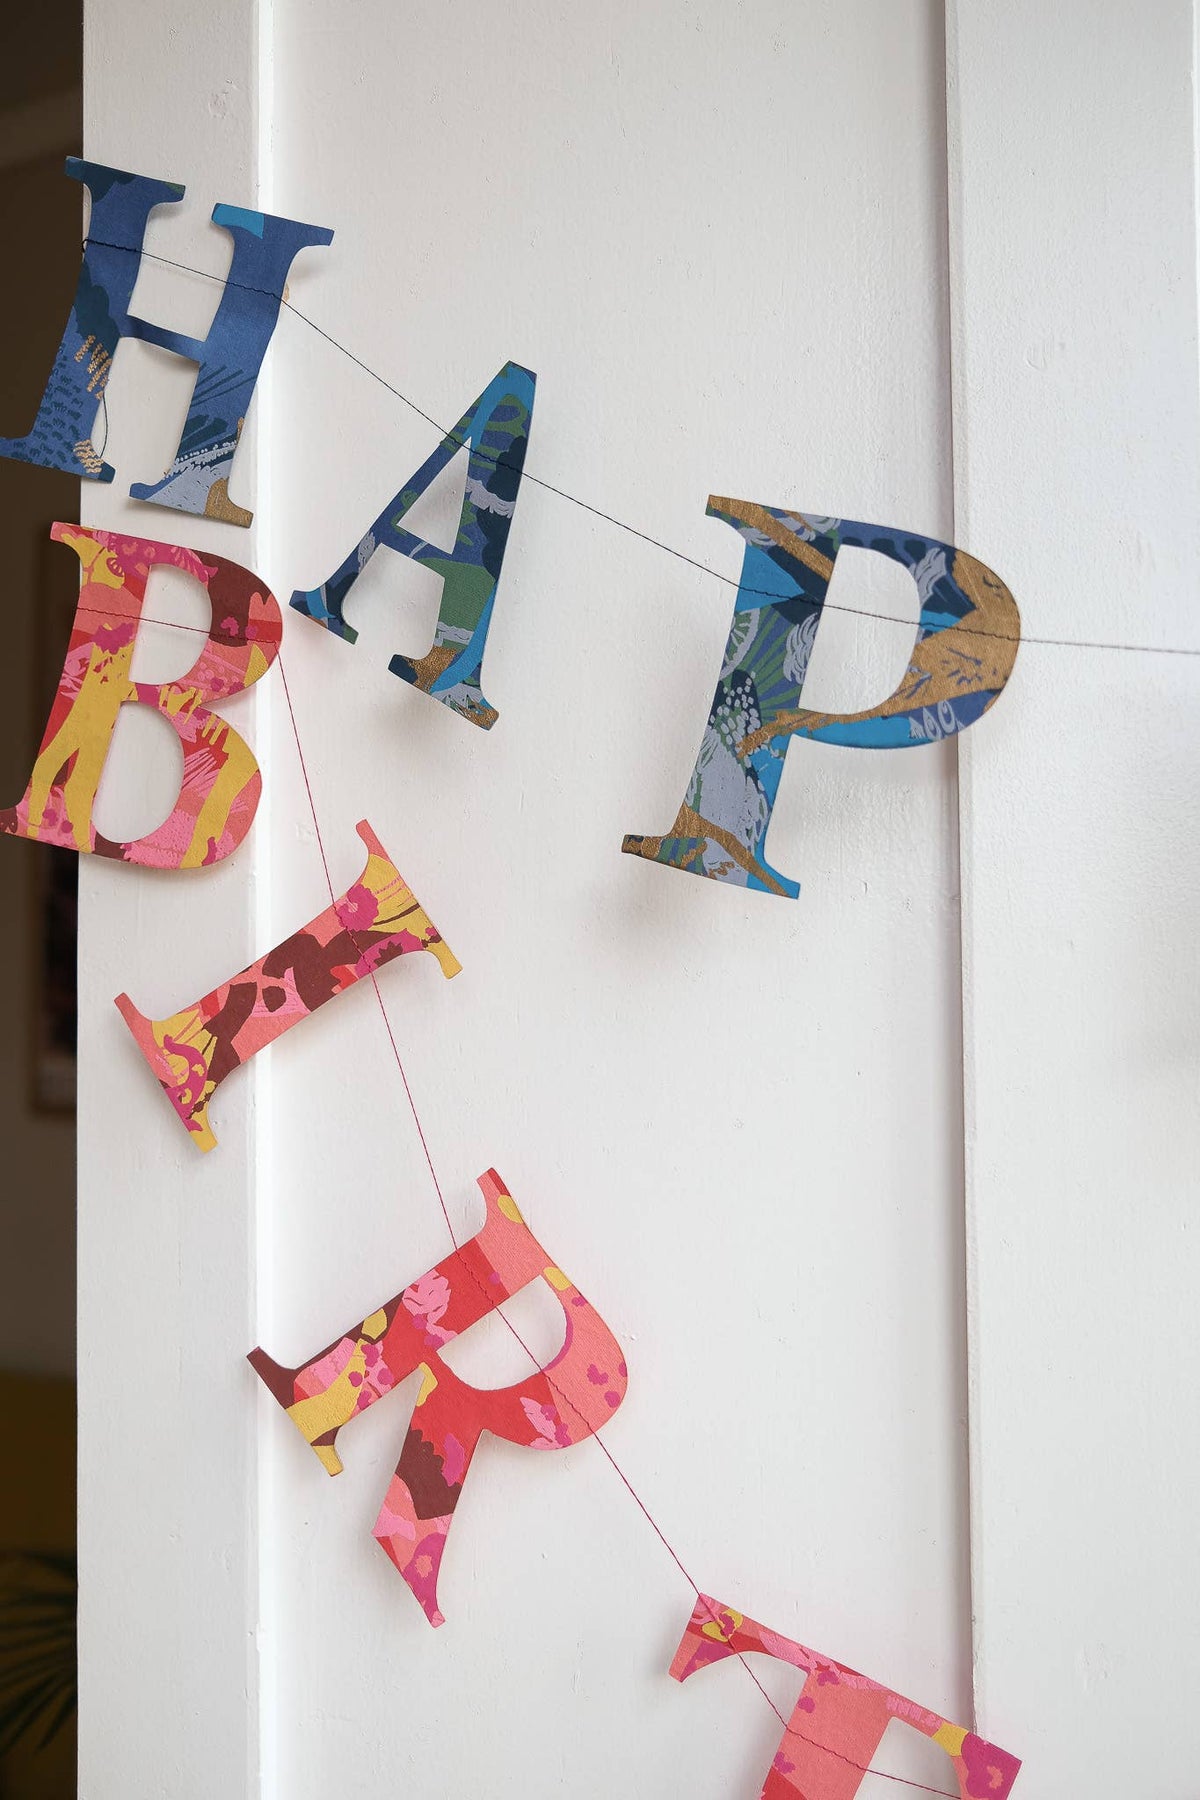 East End Press - Happy Birthday - Recycled Red Mix Sewn Garland